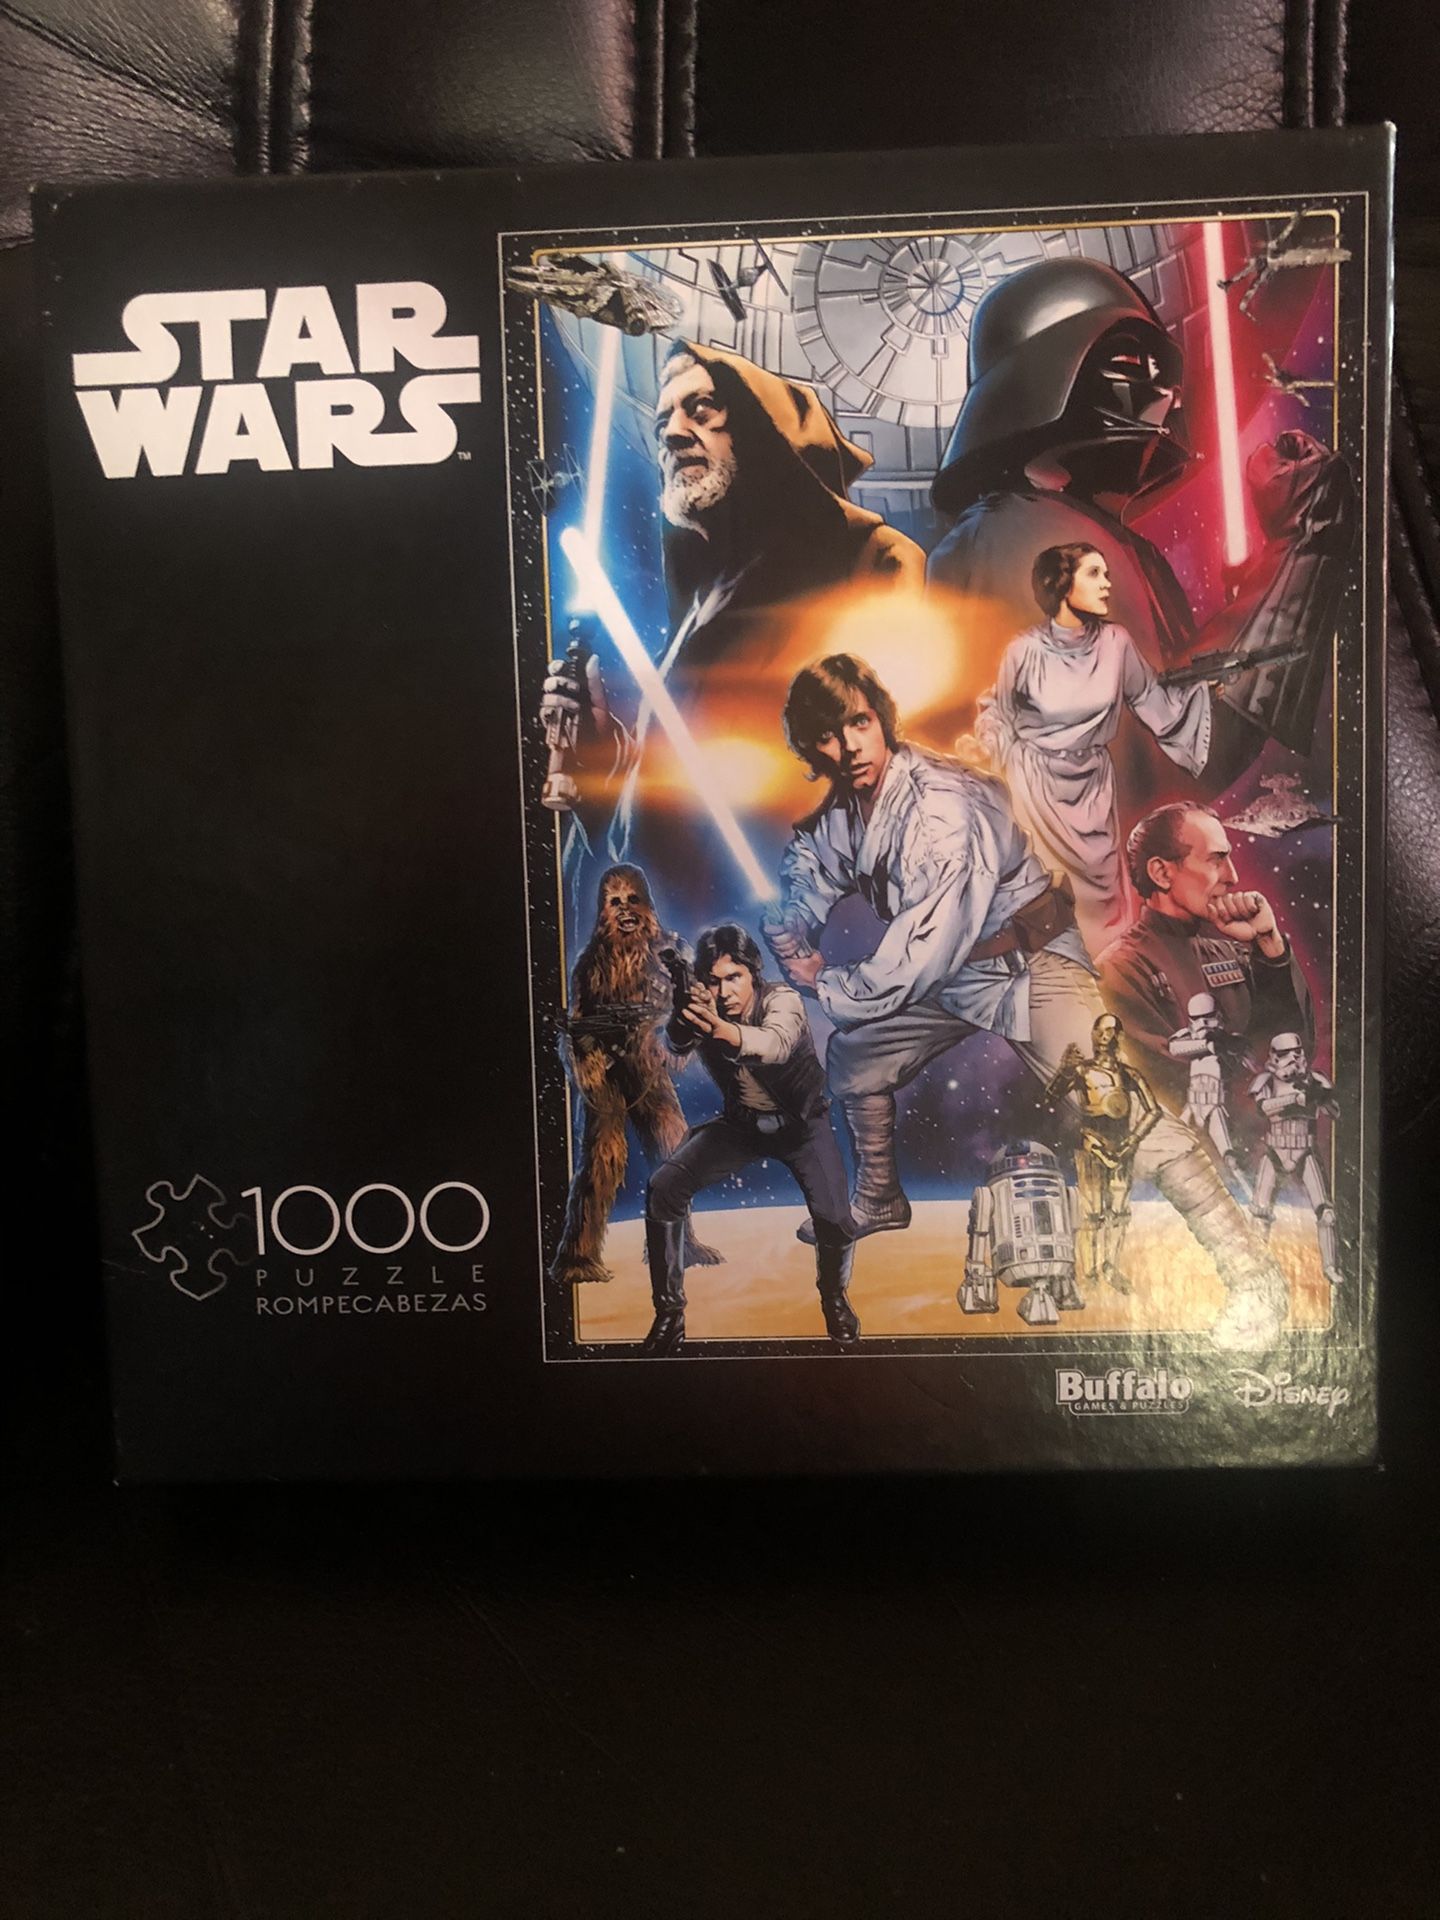 STAR WARS 1000 PIECE PUZZLE BY BUFFALO GAMES DISNEY JIGSAW PUZZLE